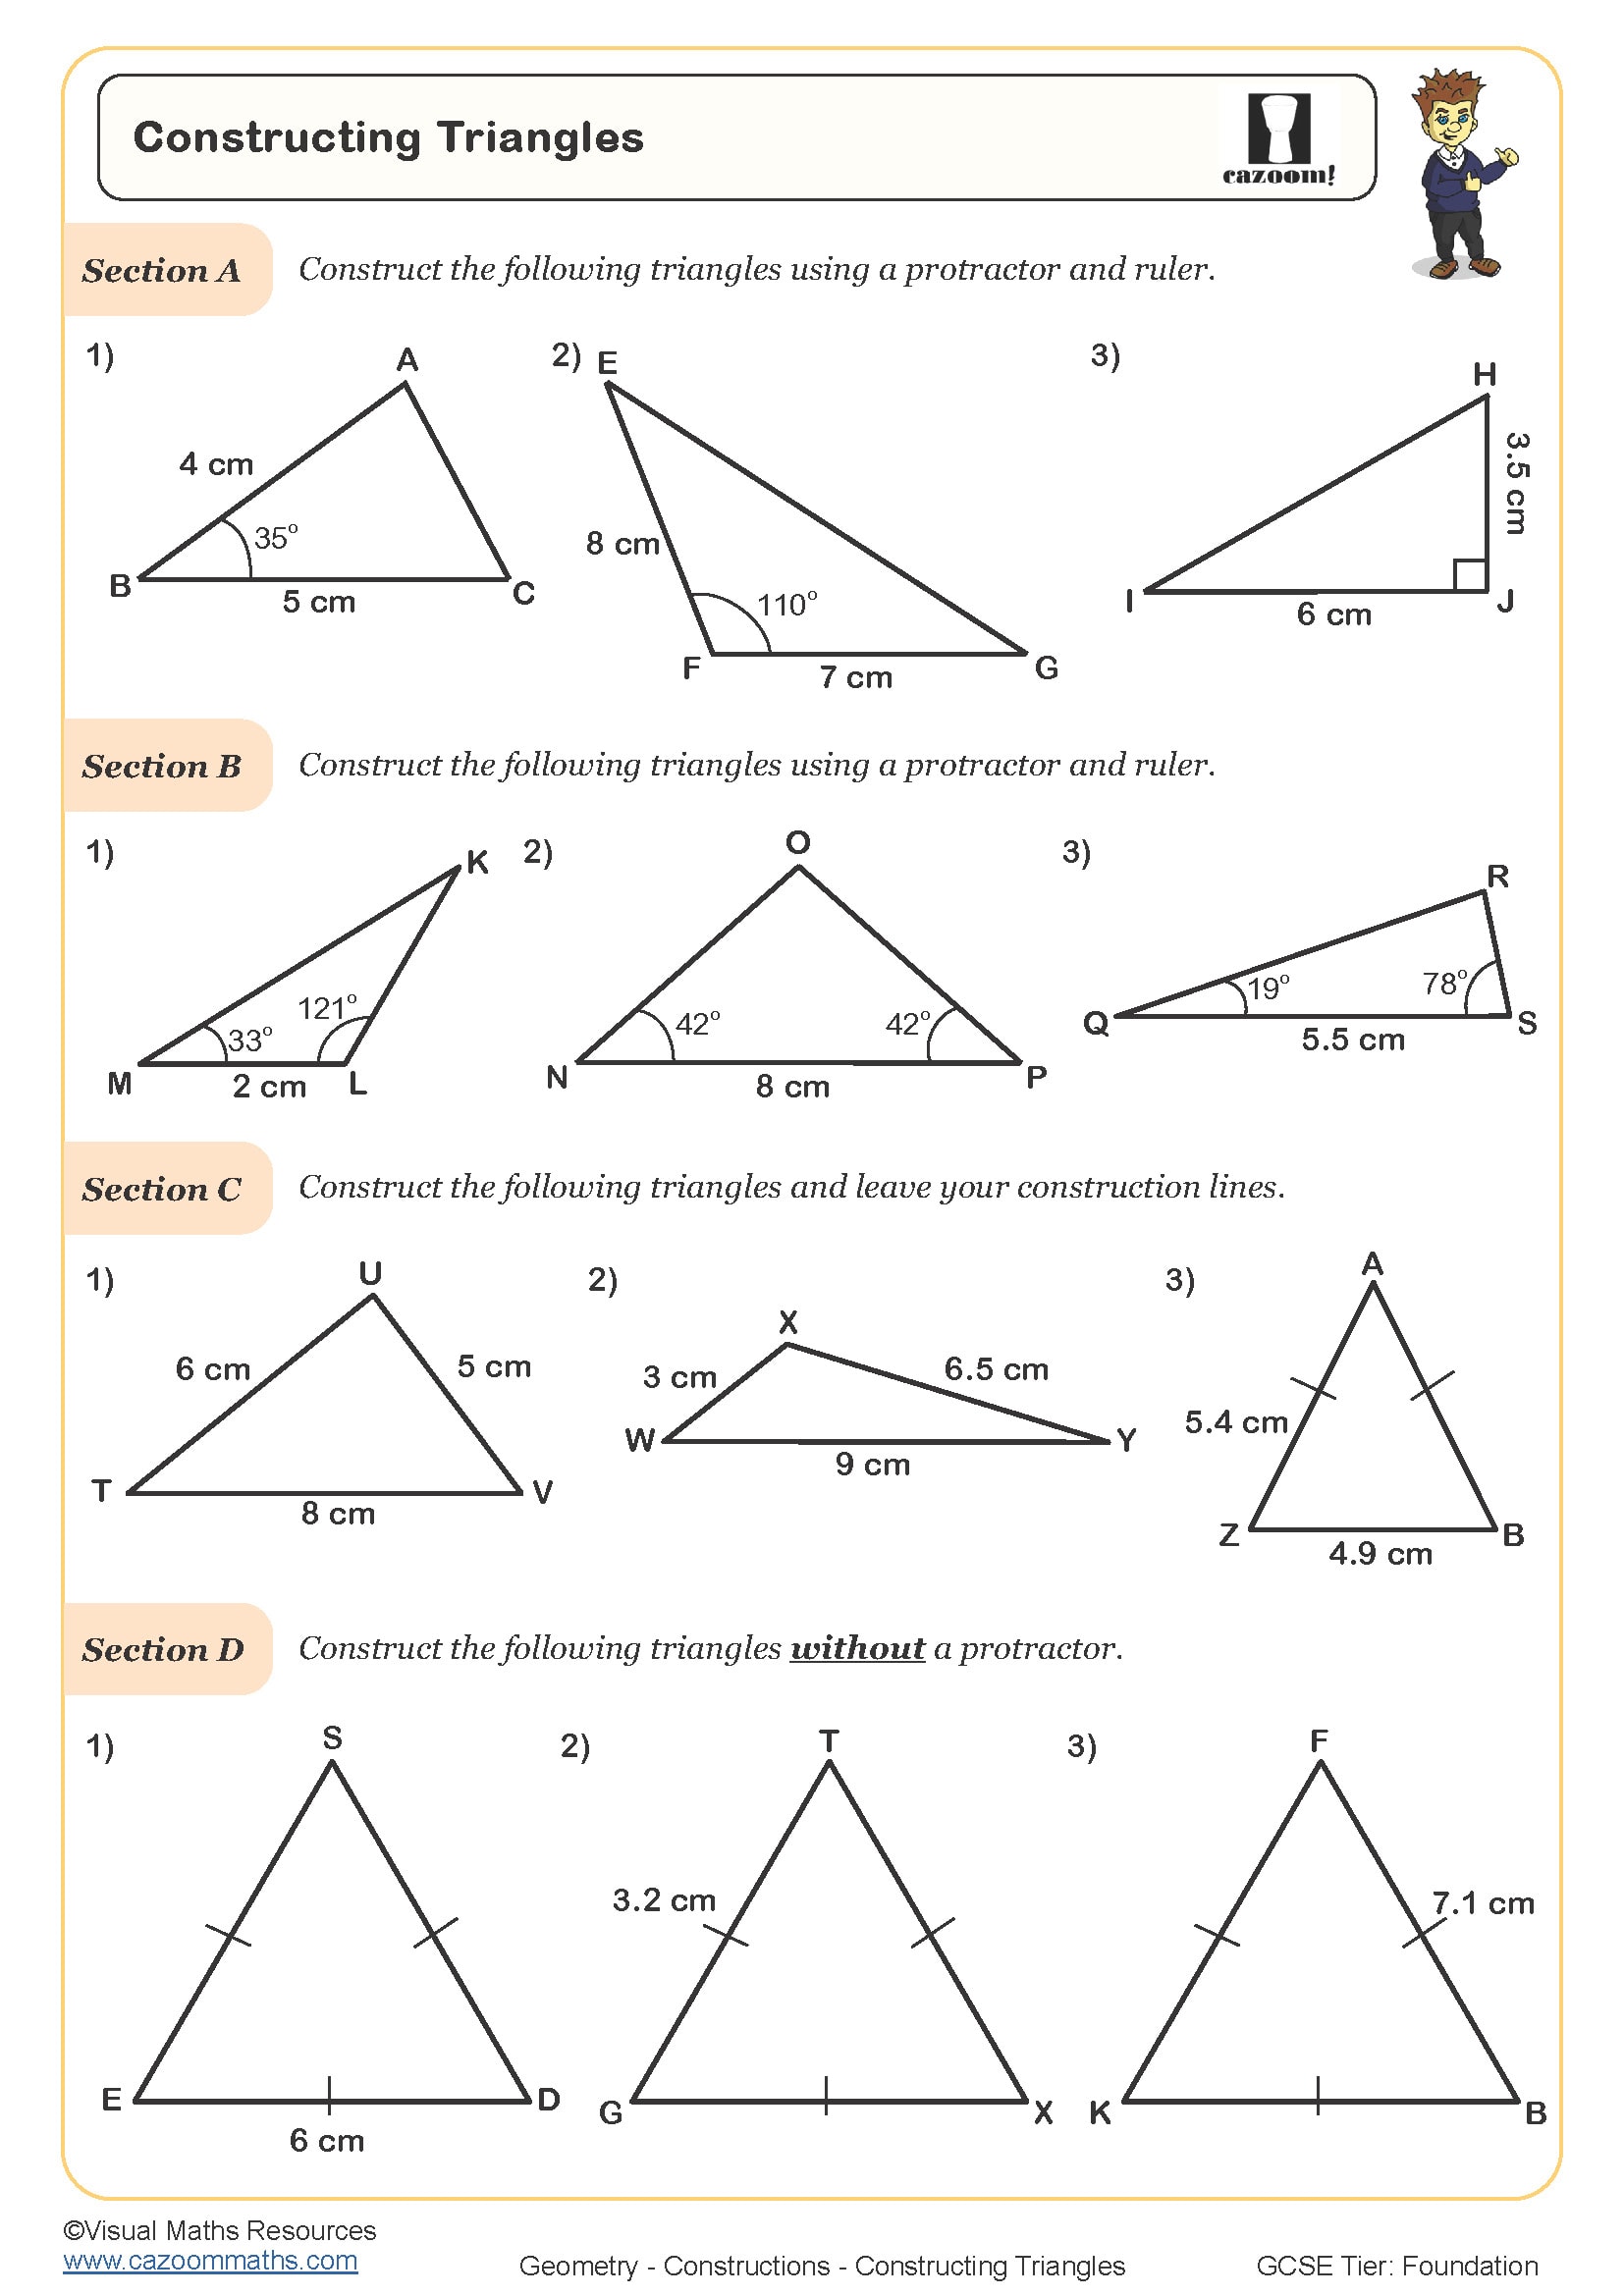 Constructing Triangles Worksheet fit for students in year 7 and year 8